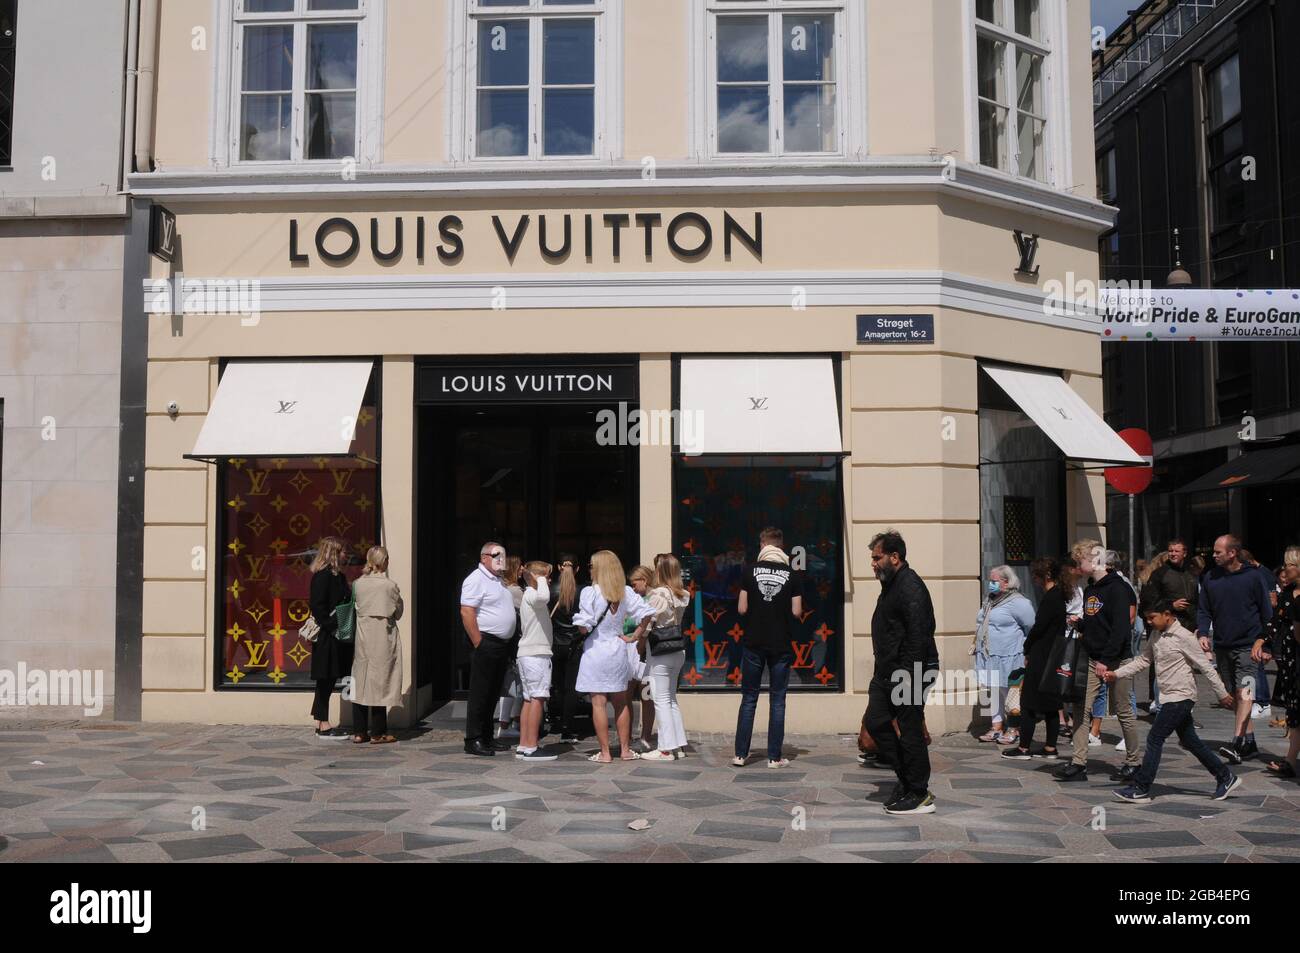 effektivitet Hellere Abundantly Copenhagen, Denmark. 02 August 2021, Shoppers waiting at Louis Vuitton  store dueto social distancing in store due to covid-19 health issue. (Photo  Stock Photo - Alamy